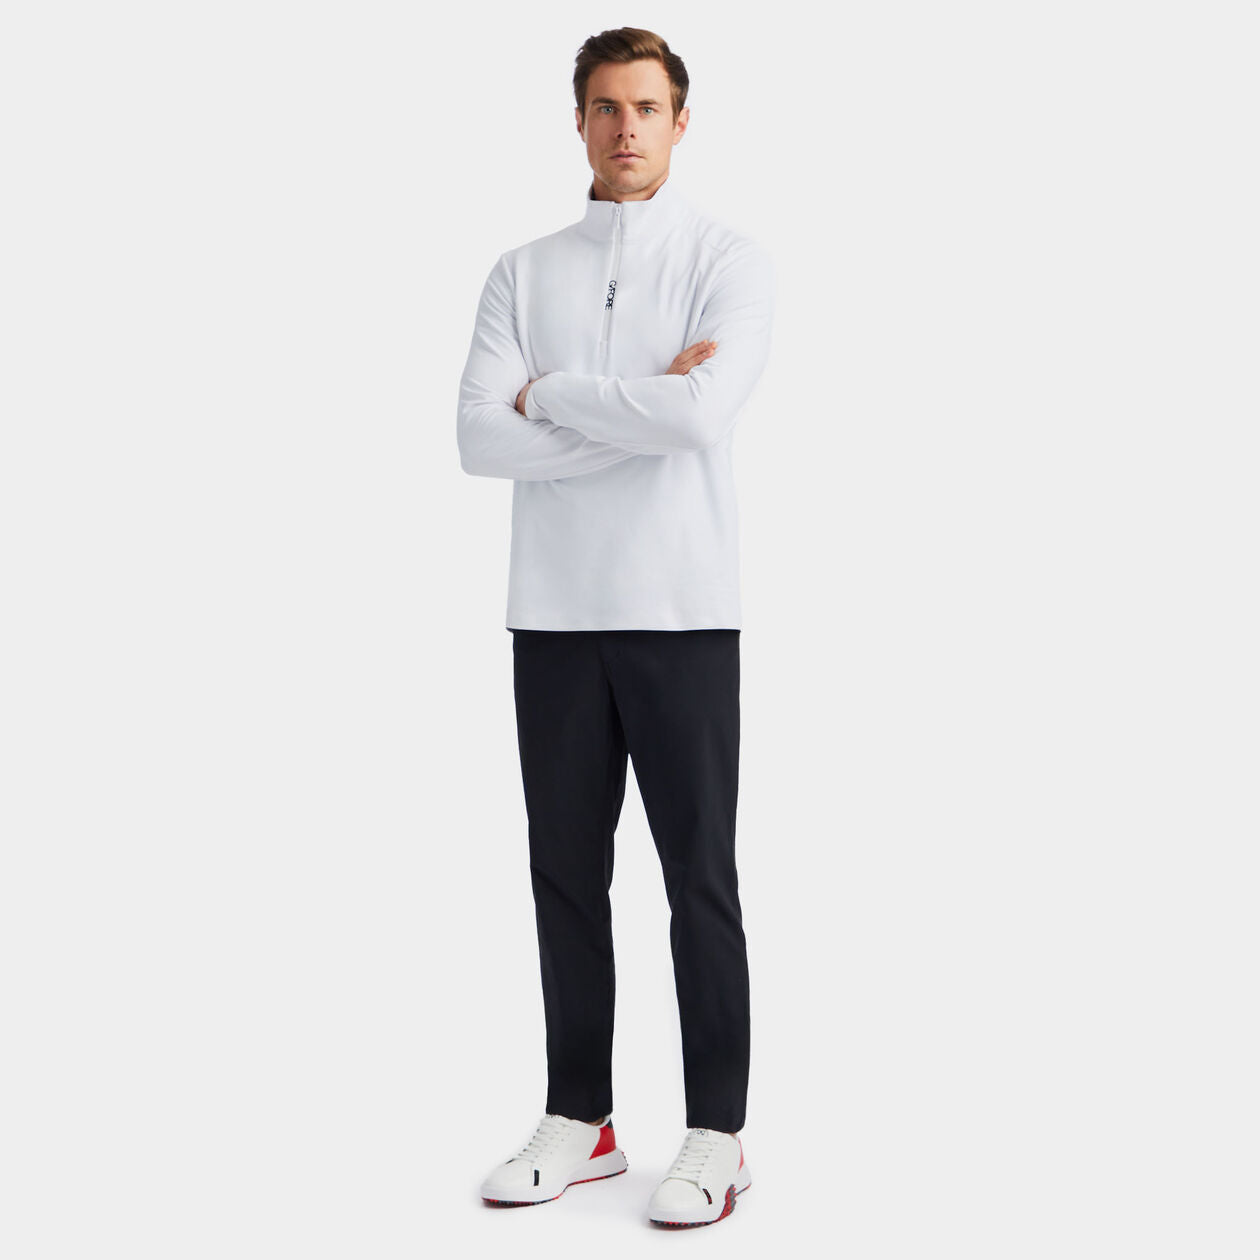 G/FORE Brushed Back Tech Quarter Zip Pullover - White